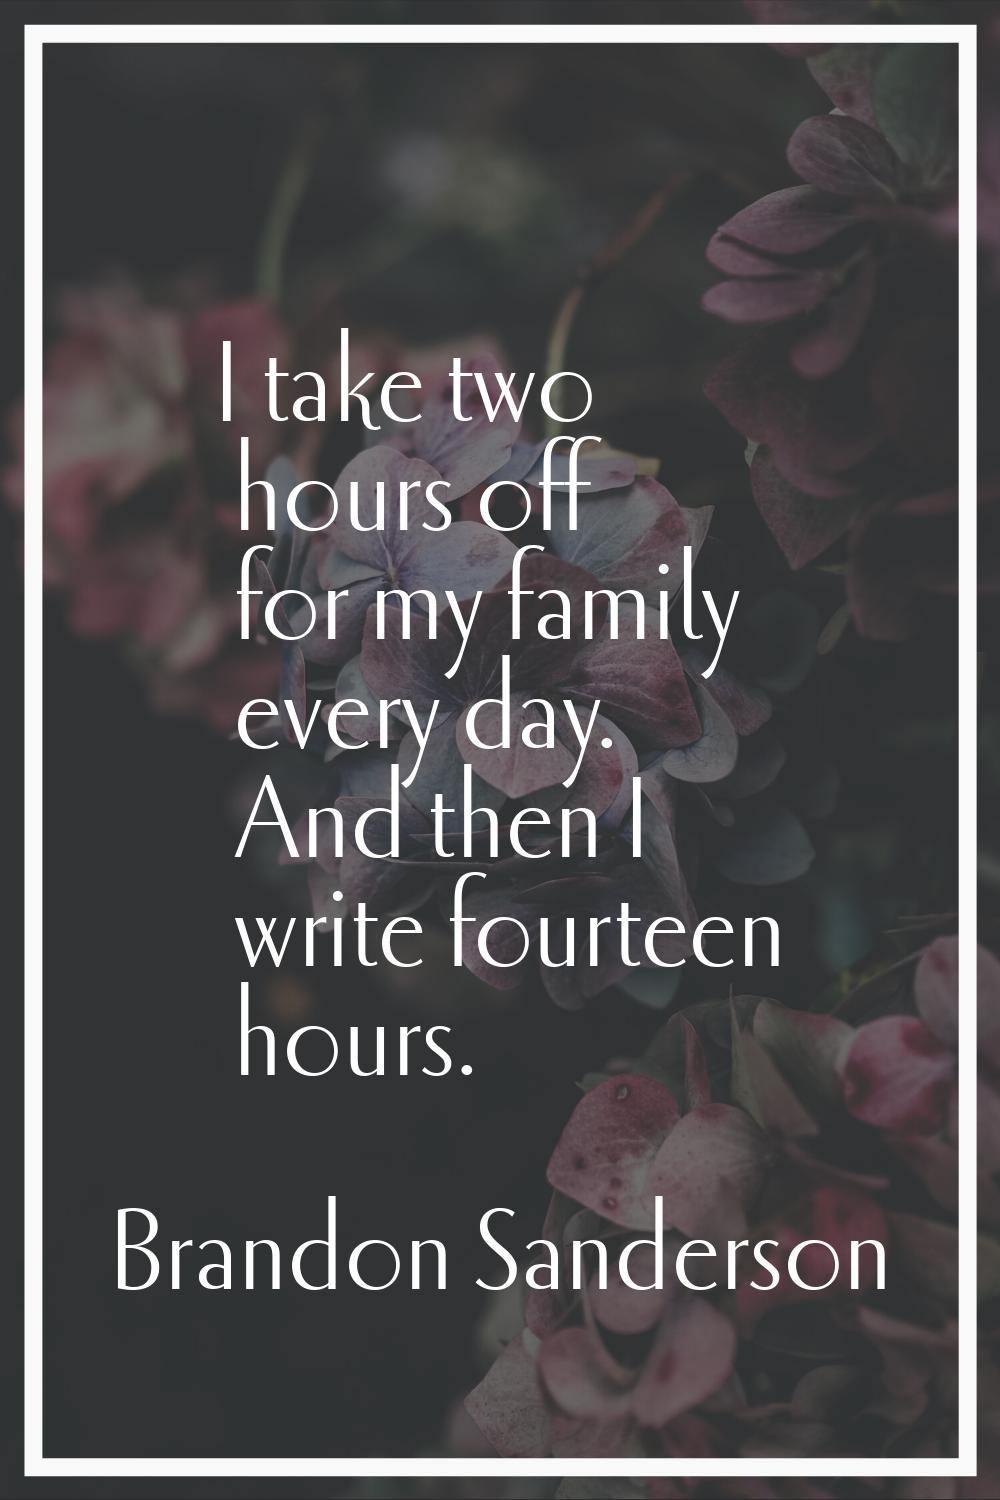 I take two hours off for my family every day. And then I write fourteen hours.